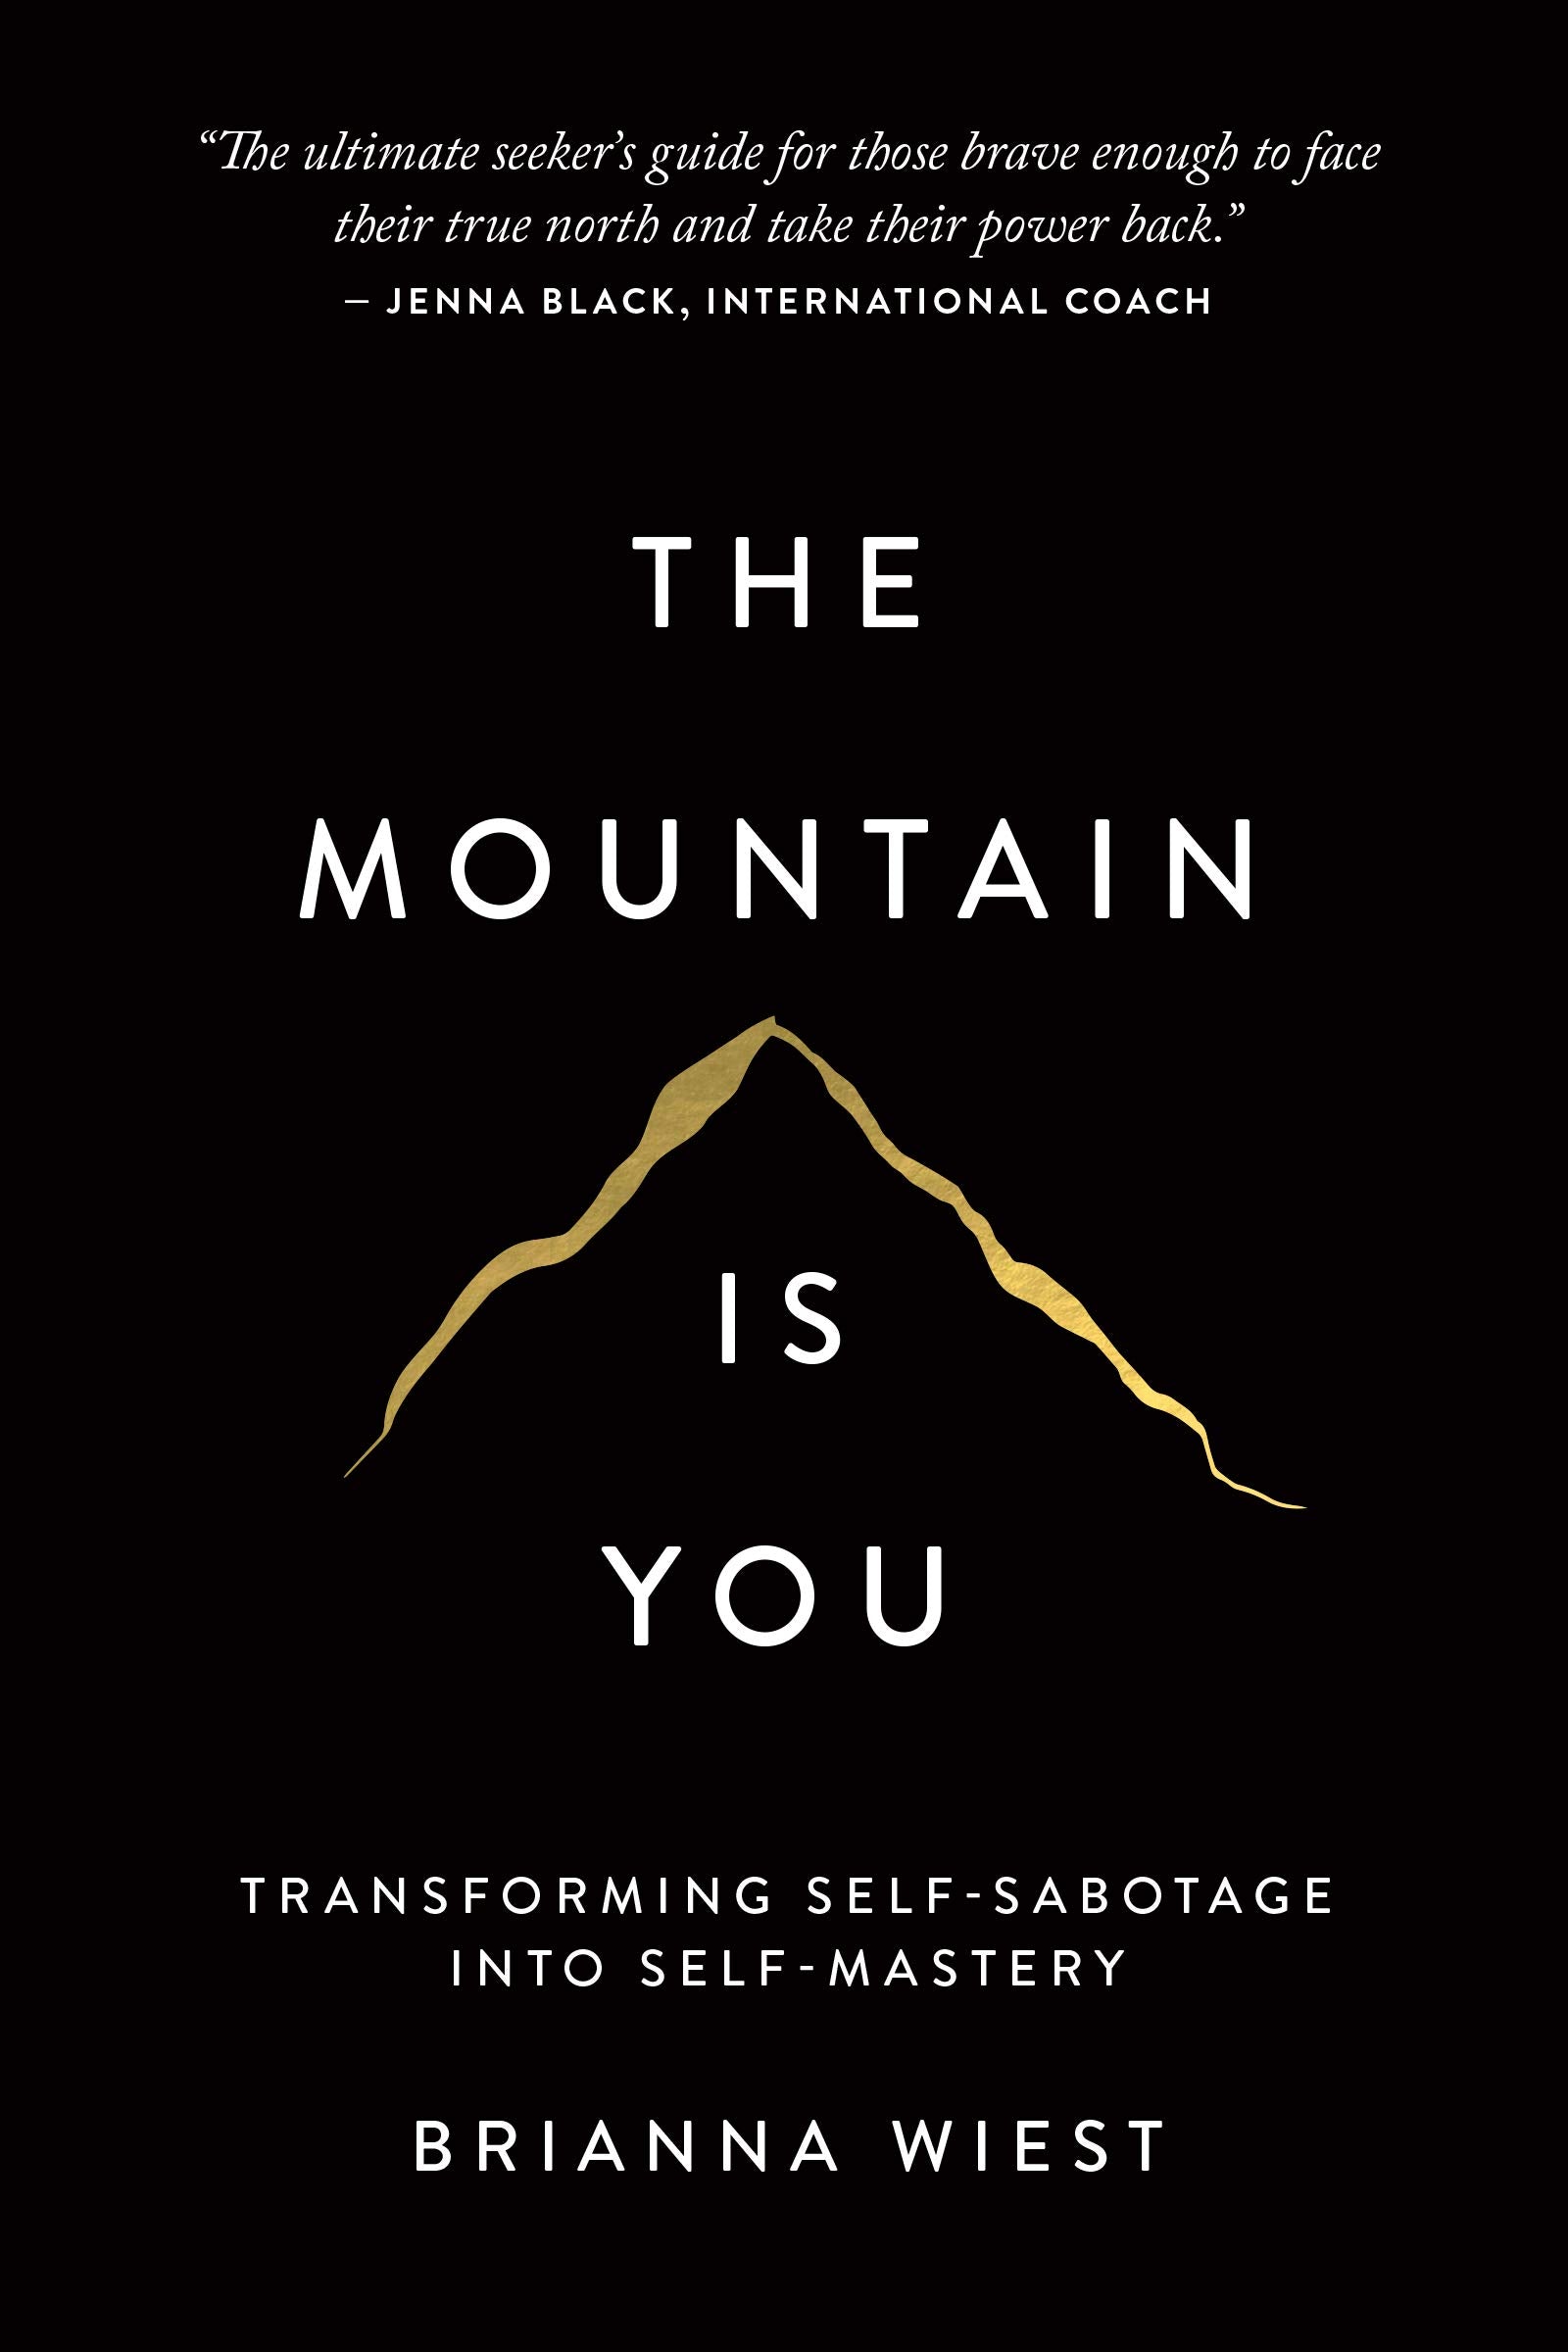 The mountain is you by Brianna Weist